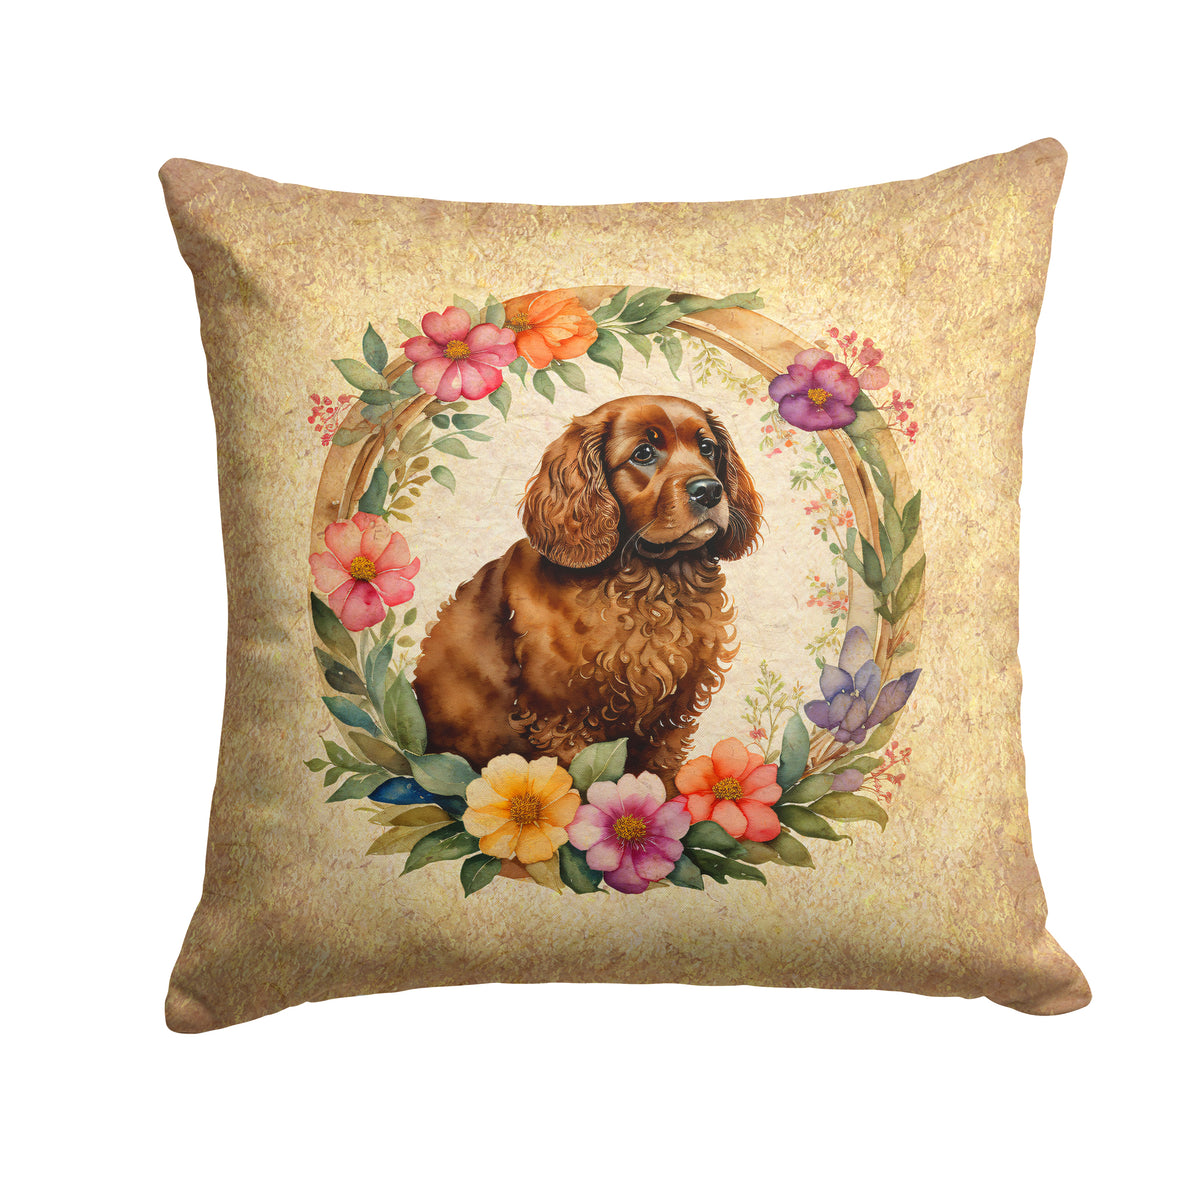 Buy this American Water Spaniel and Flowers Fabric Decorative Pillow